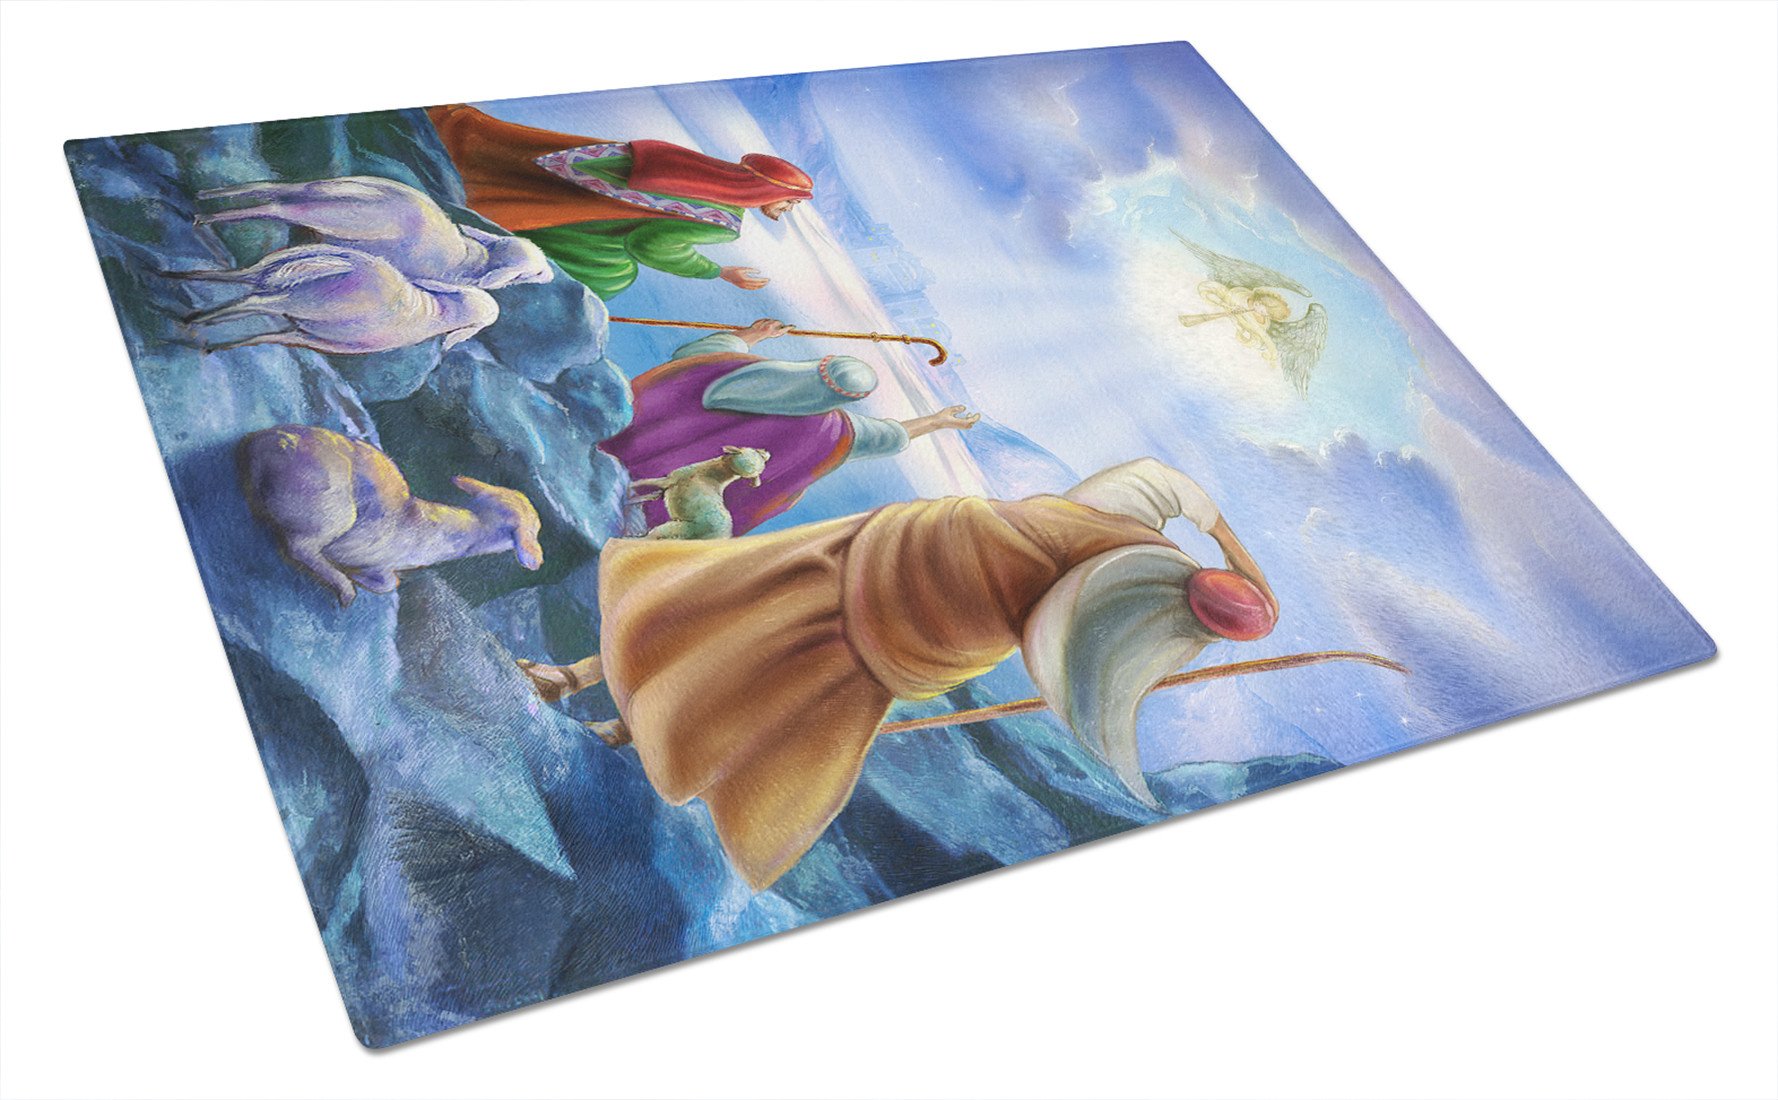 The Shepherds and Angels Appeared Glass Cutting Board Large APH5468LCB by Caroline's Treasures